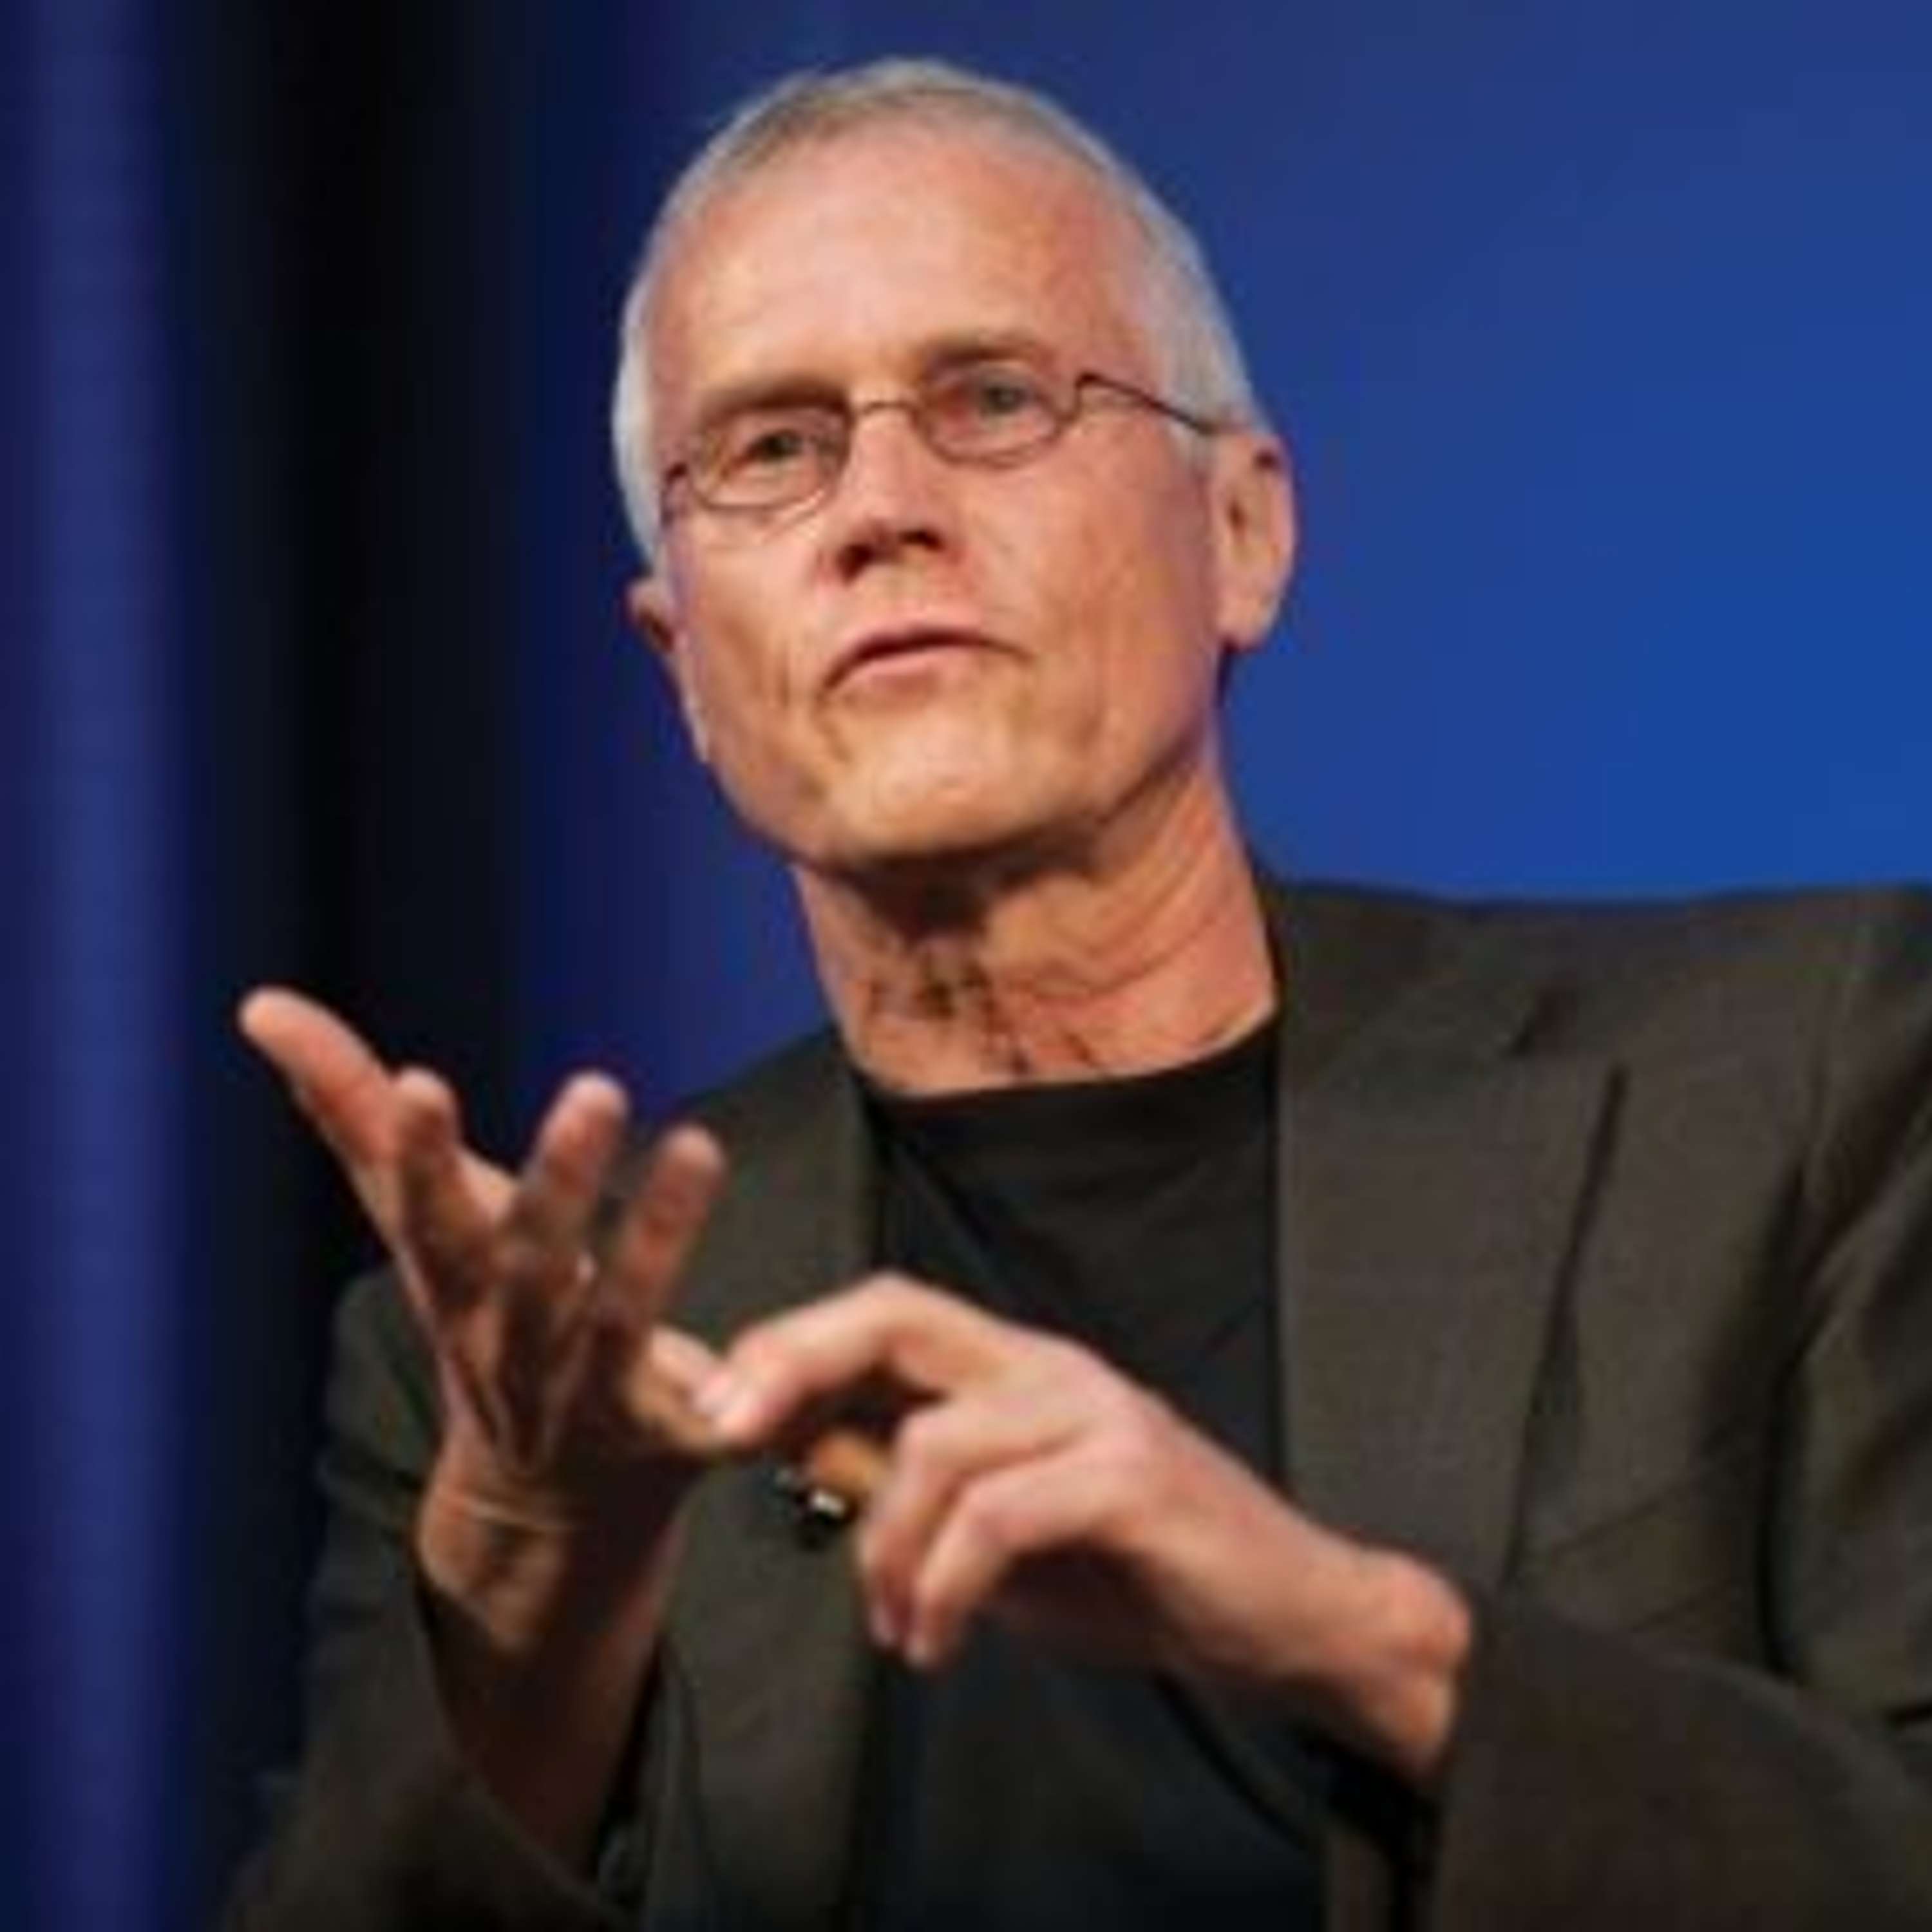 Episode 50: Interview with Paul Hawken, co-founder and Executive Director of Project Drawdown